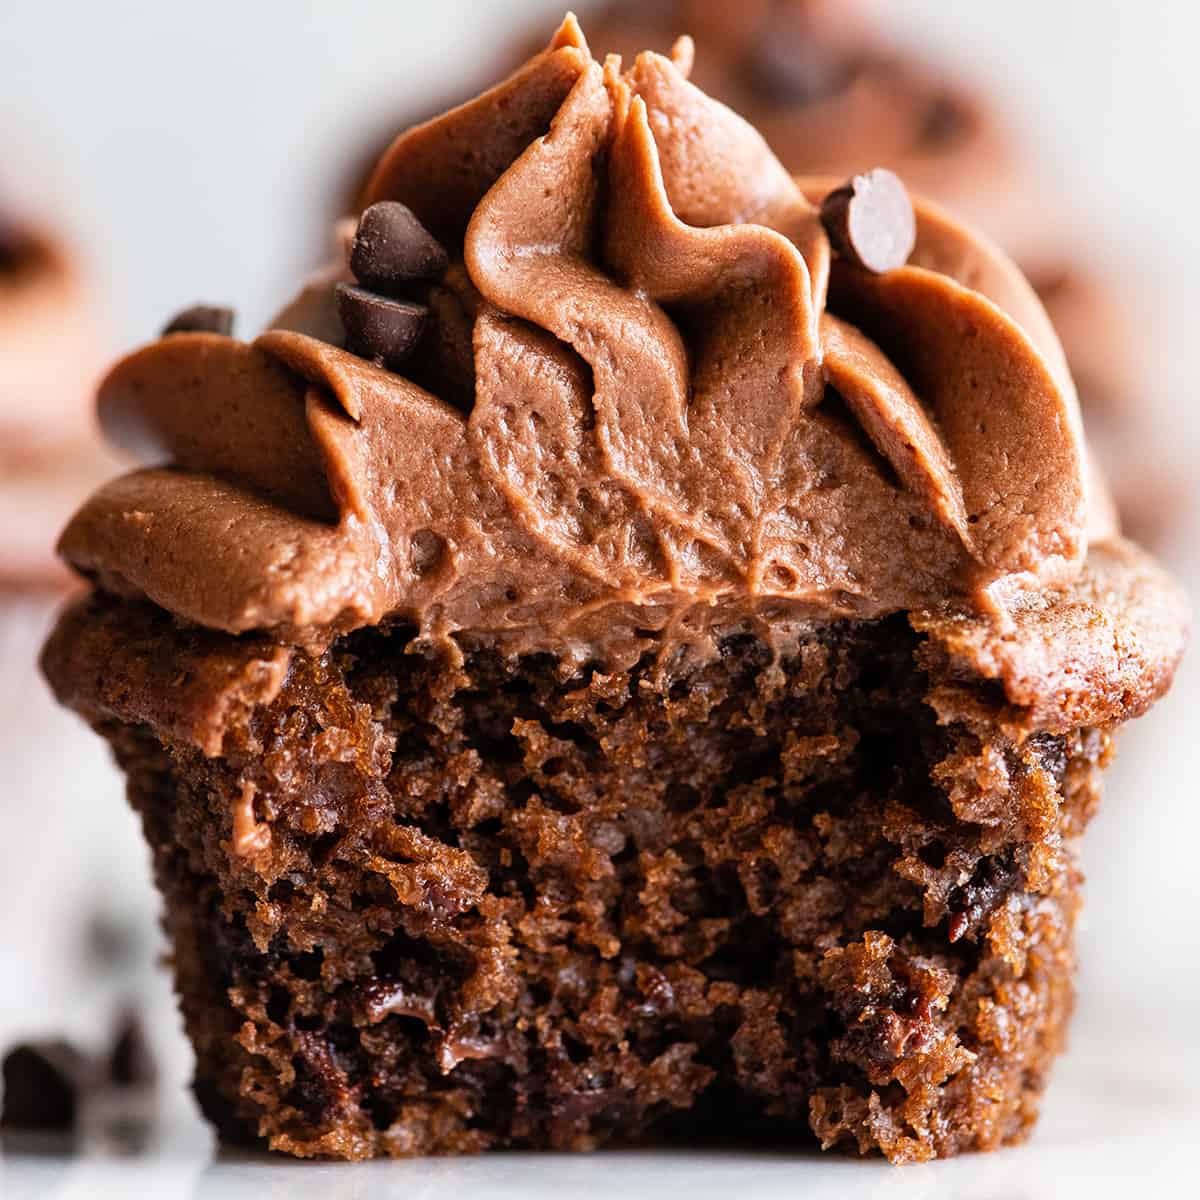 up close photo of chocolate frosting on top of a chocolate cupcake with a bite taken out of it